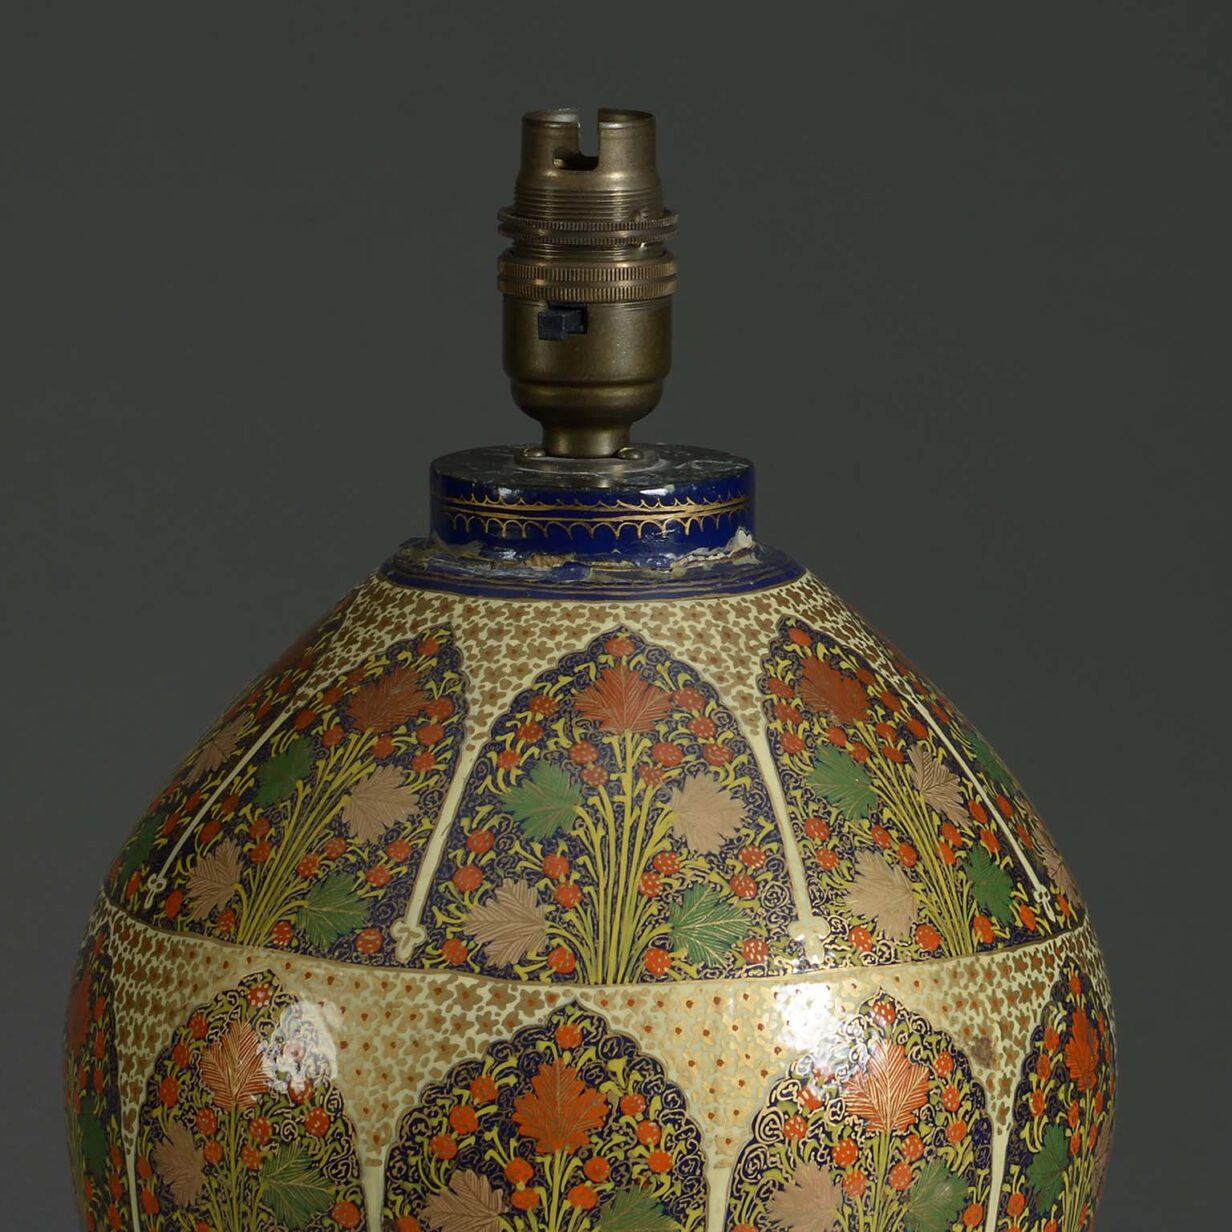 Early 20th century kashmiri lacquer table lamp